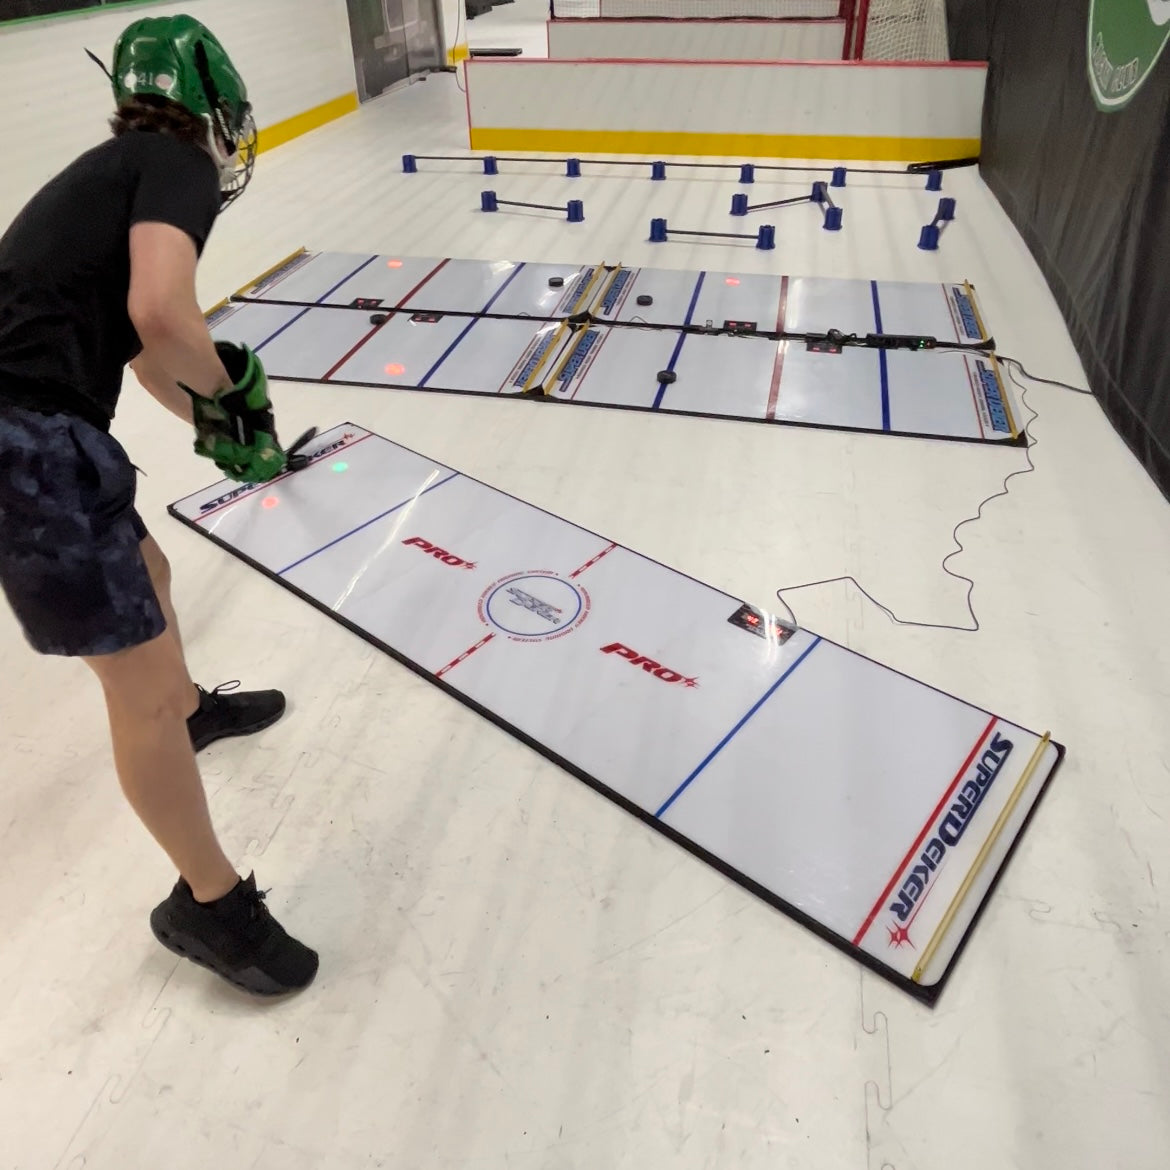 Use the SuperDekerPRO to learn how to get better at stickhandling in Hockey! This Fun Stickhandling Training Device uses lights and sensors and a connected App to improve your hockey skills! 